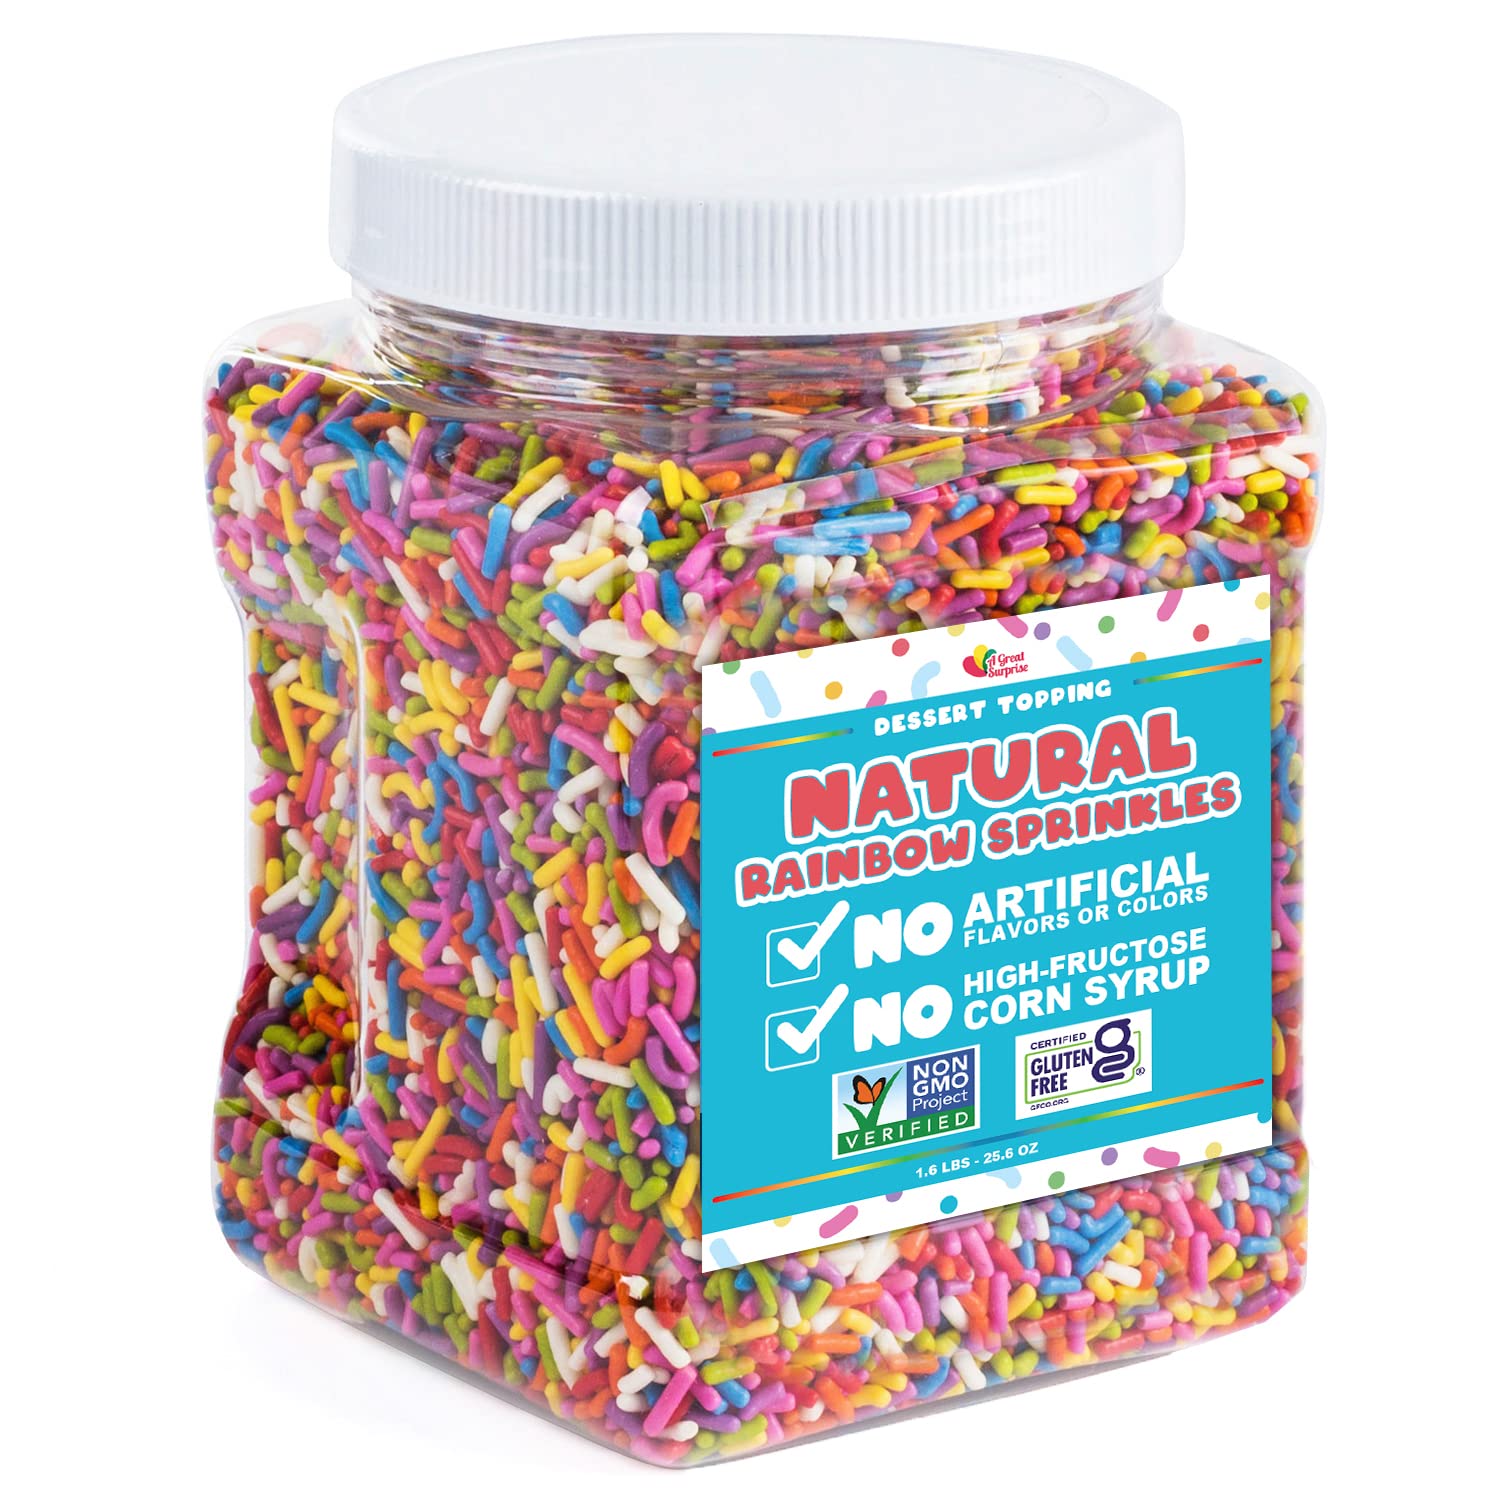 100% NATURAL Chocolate Sprinkles Jimmies - No Artificial Dyes - Gluten  Free, Vegan, Lactose Free, Bulk- 1.6 Pounds